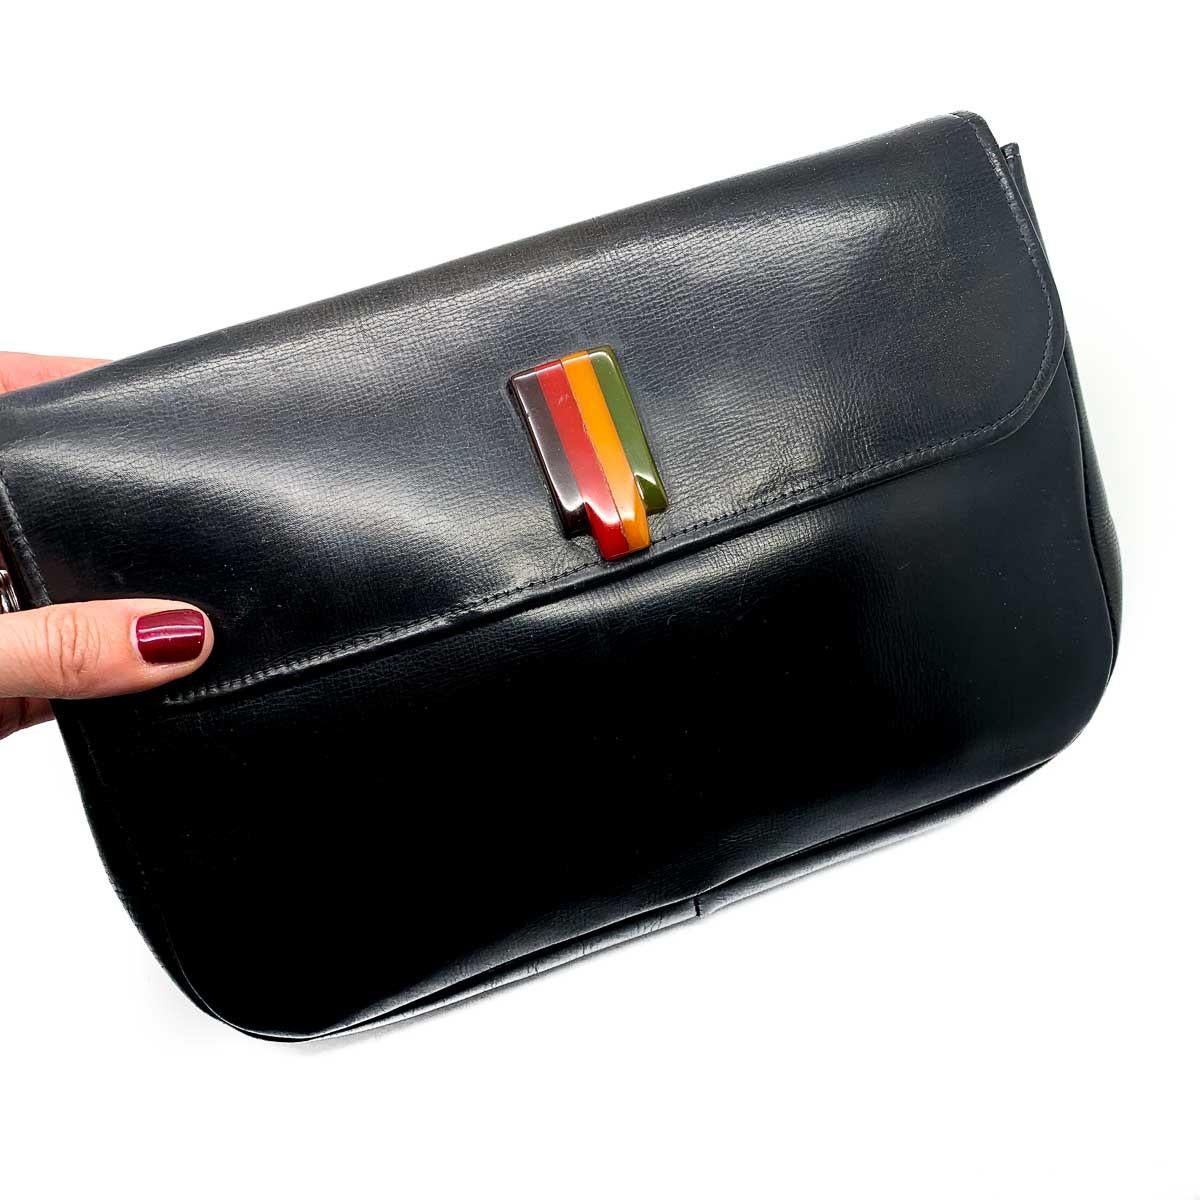 A Vintage Art Deco Bakelite Clutch Bag from the 1930s. An eternally classic black leather clutch finished to perfection with the hallmark art deco Bakelite in four glorious colours. A stylish grab strap on the back makes carrying easy and elegant. A